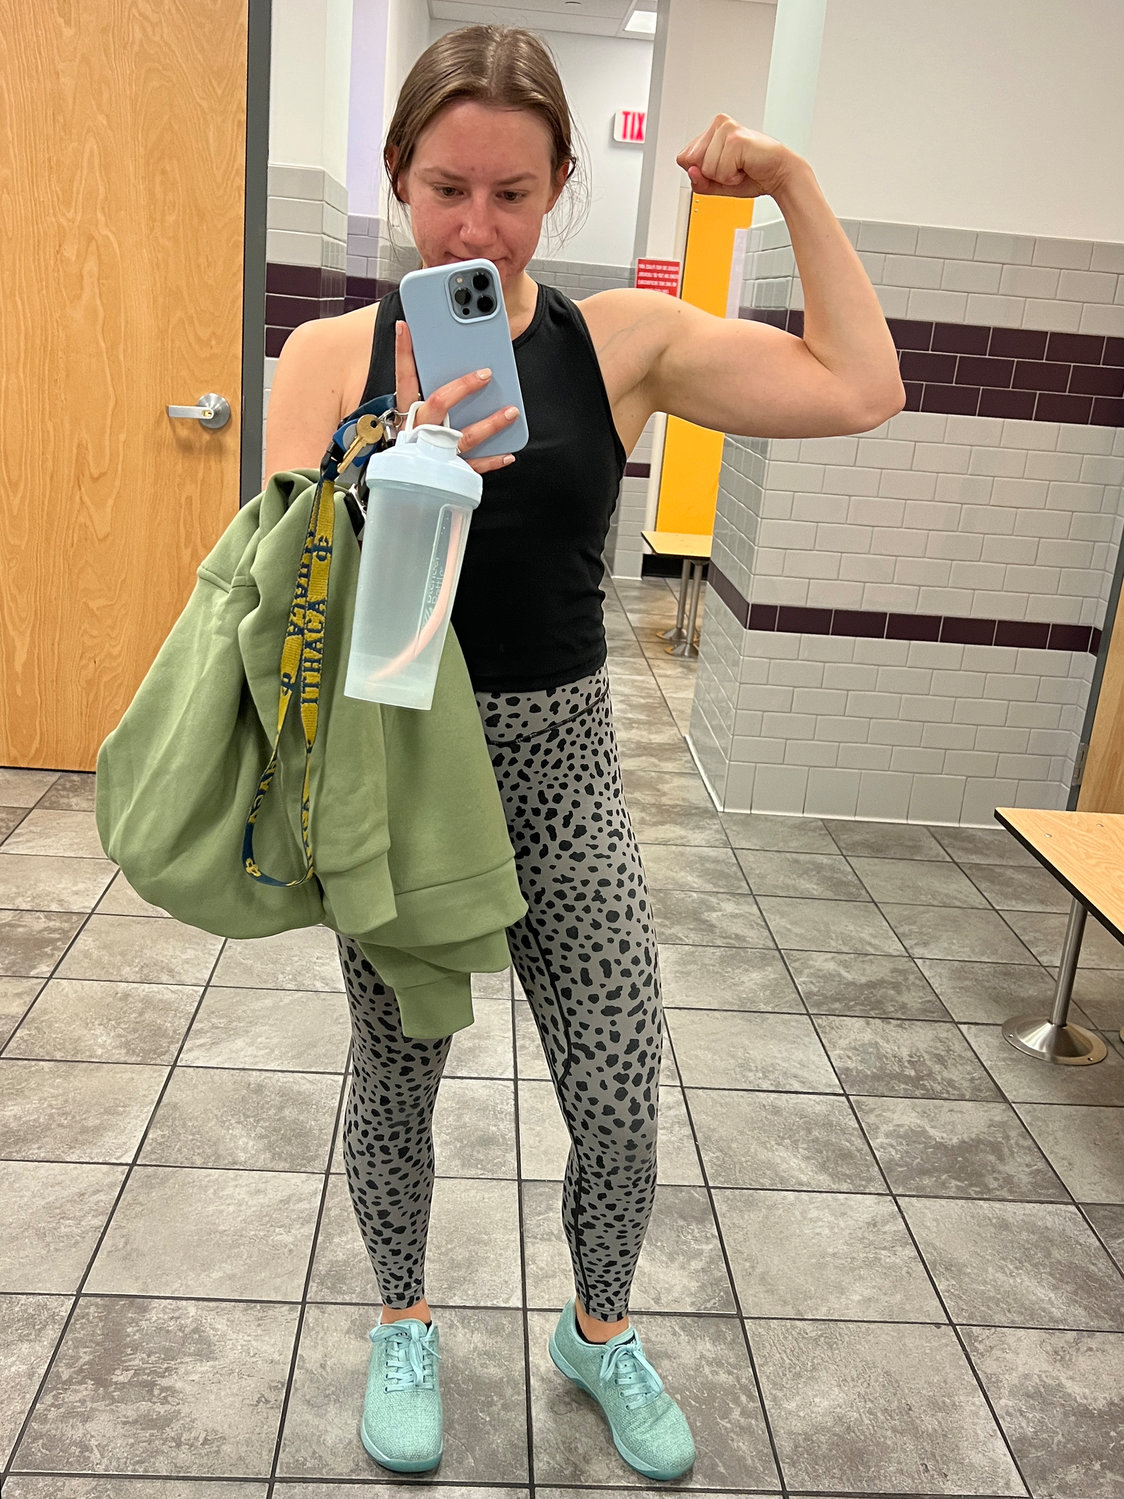 Yes, I am one of those people who carries a water bottle around with me everywhere I go. Bringing water with me helps me reach my goal each day. Join the club, it’s fun over here!